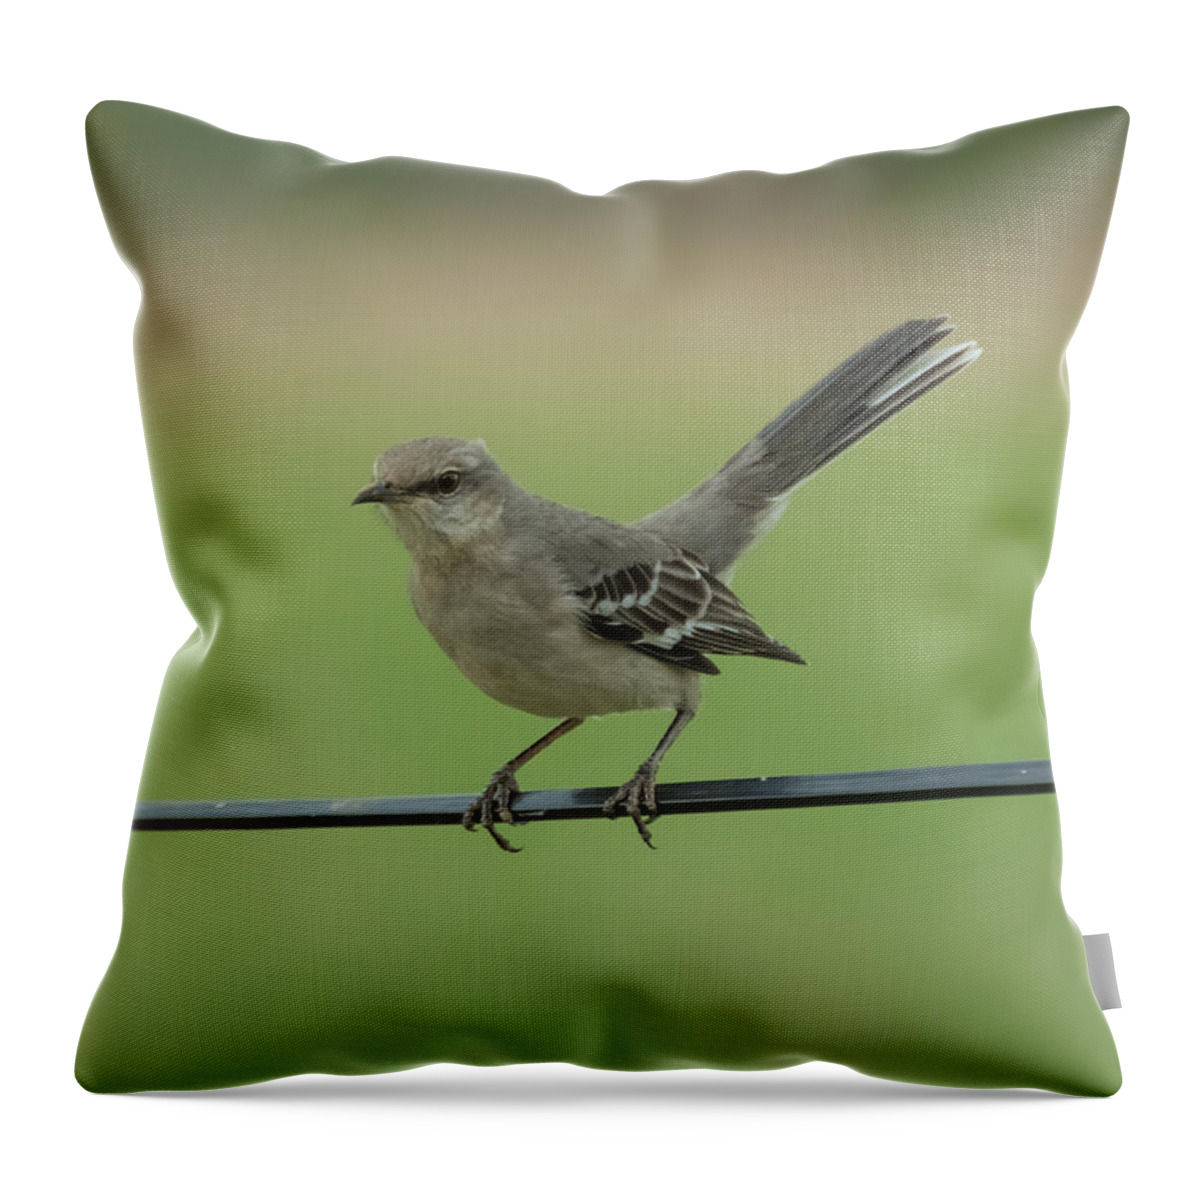 Jan Throw Pillow featuring the photograph Mockingbird by Holden The Moment